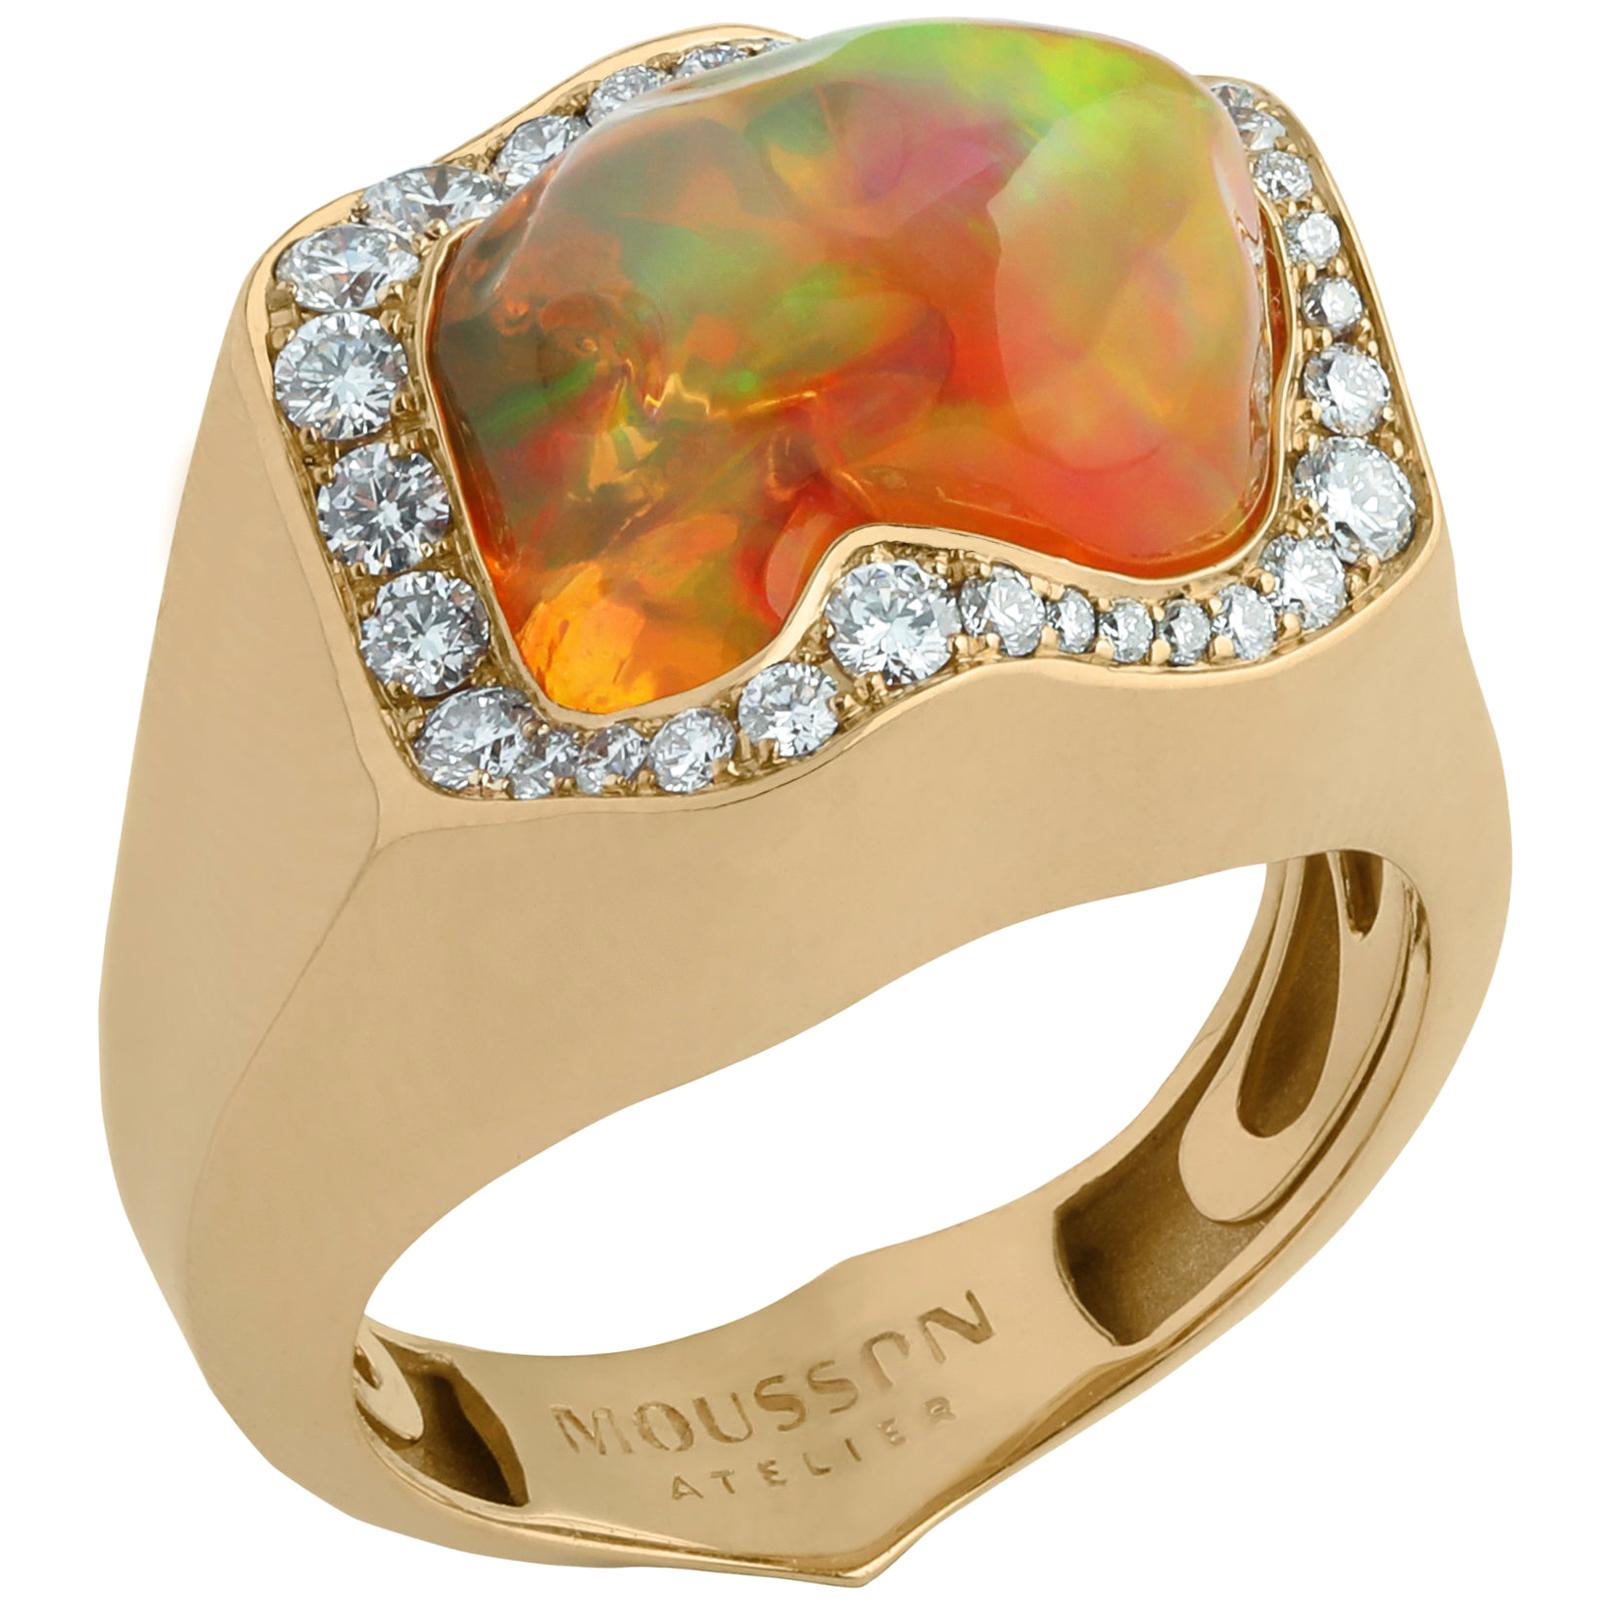 Mexican Opal 7.31 Carat Diamonds One of a Kind 18 Karat Yellow Gold Ring